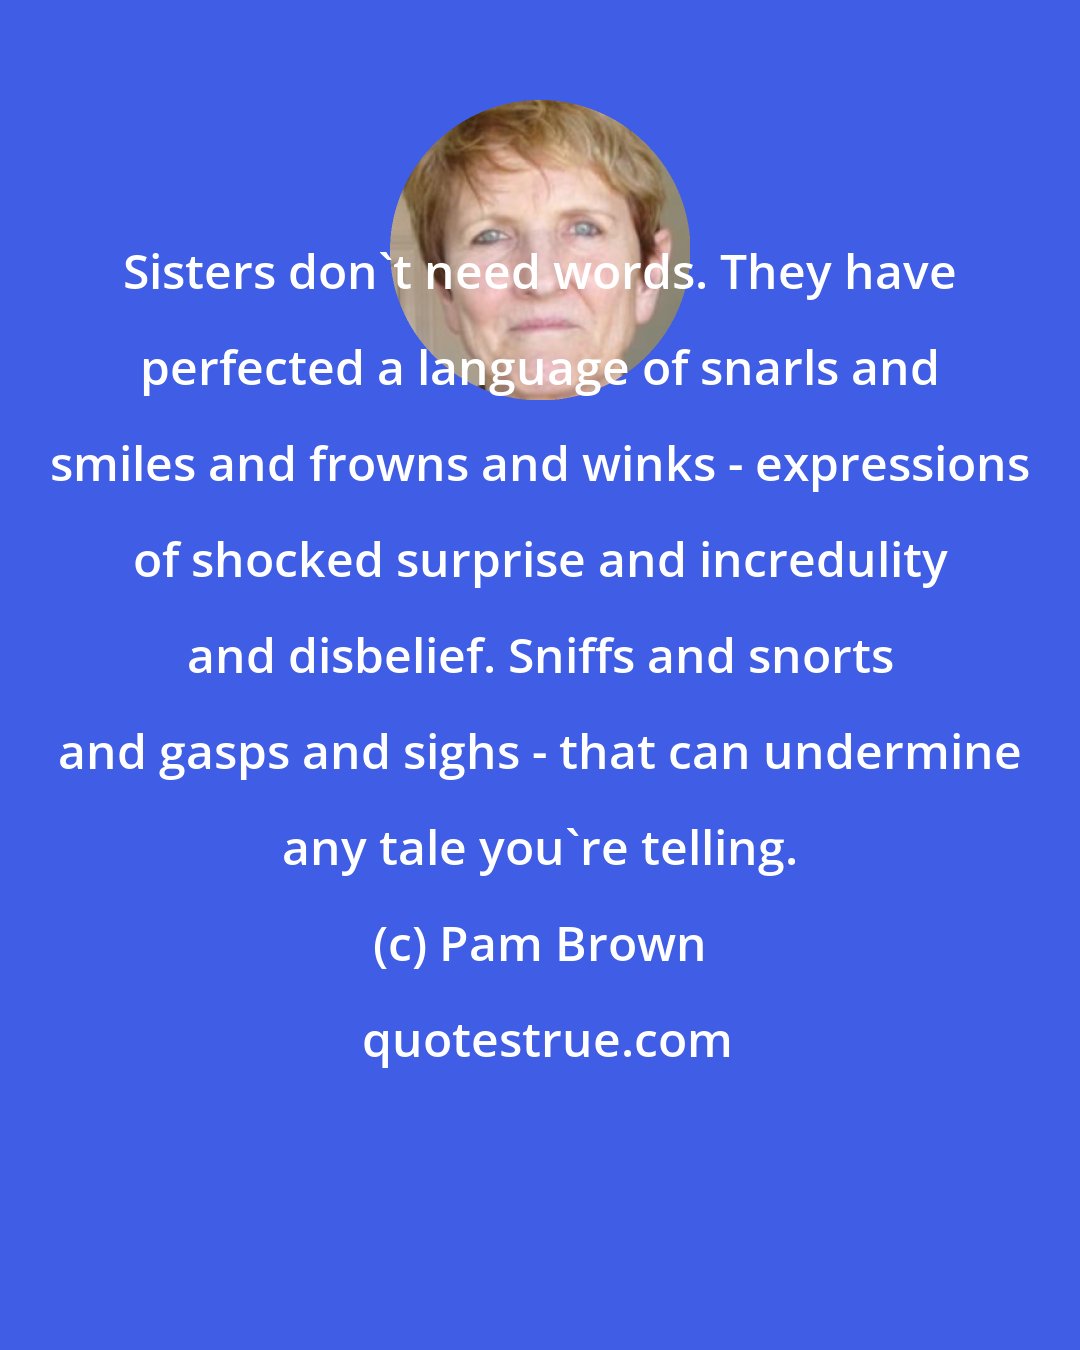 Pam Brown: Sisters don't need words. They have perfected a language of snarls and smiles and frowns and winks - expressions of shocked surprise and incredulity and disbelief. Sniffs and snorts and gasps and sighs - that can undermine any tale you're telling.